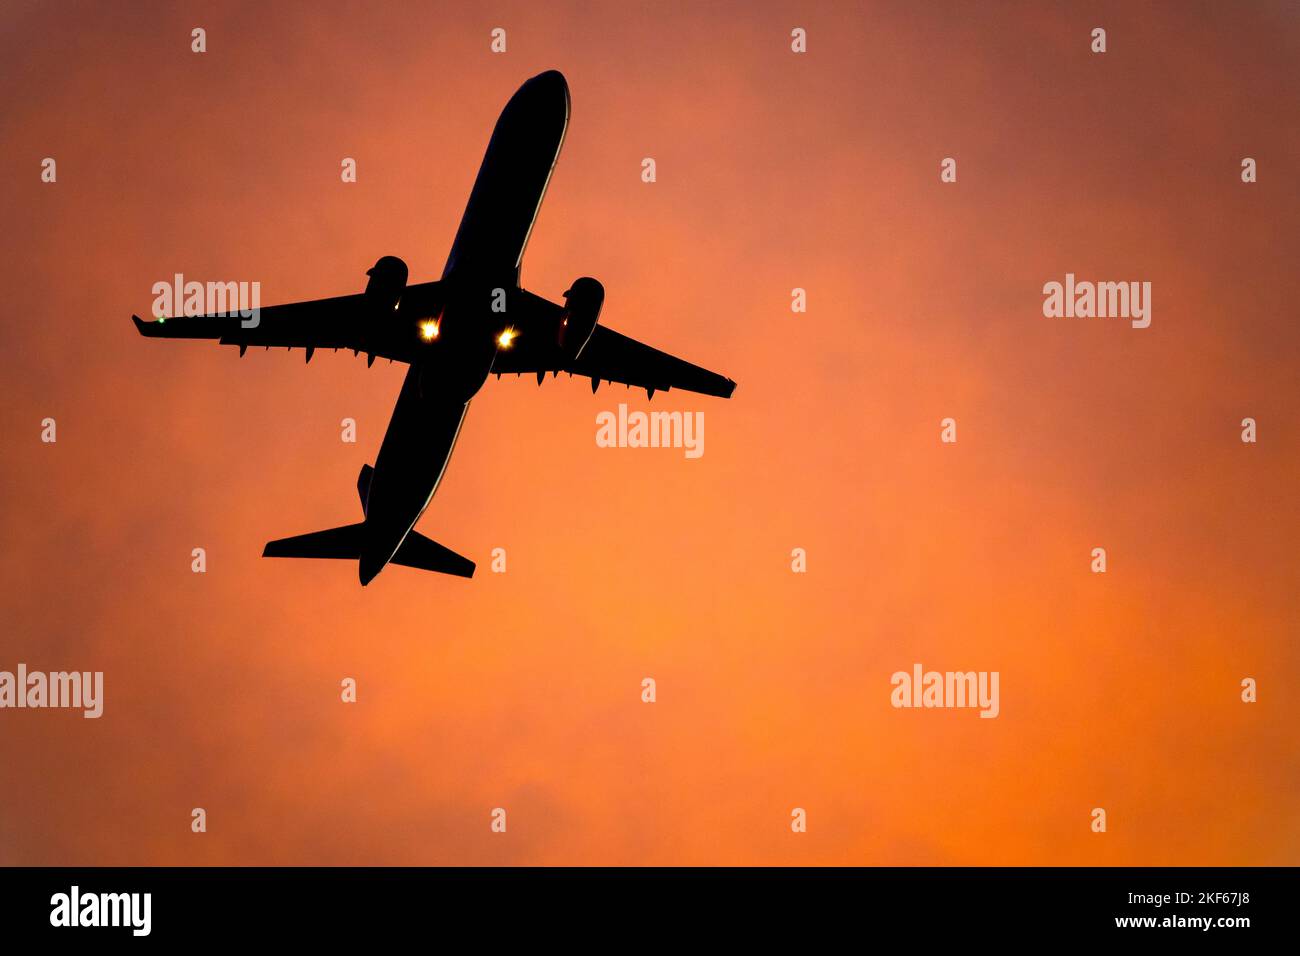 Silhouette of an airliner from below Stock Photo